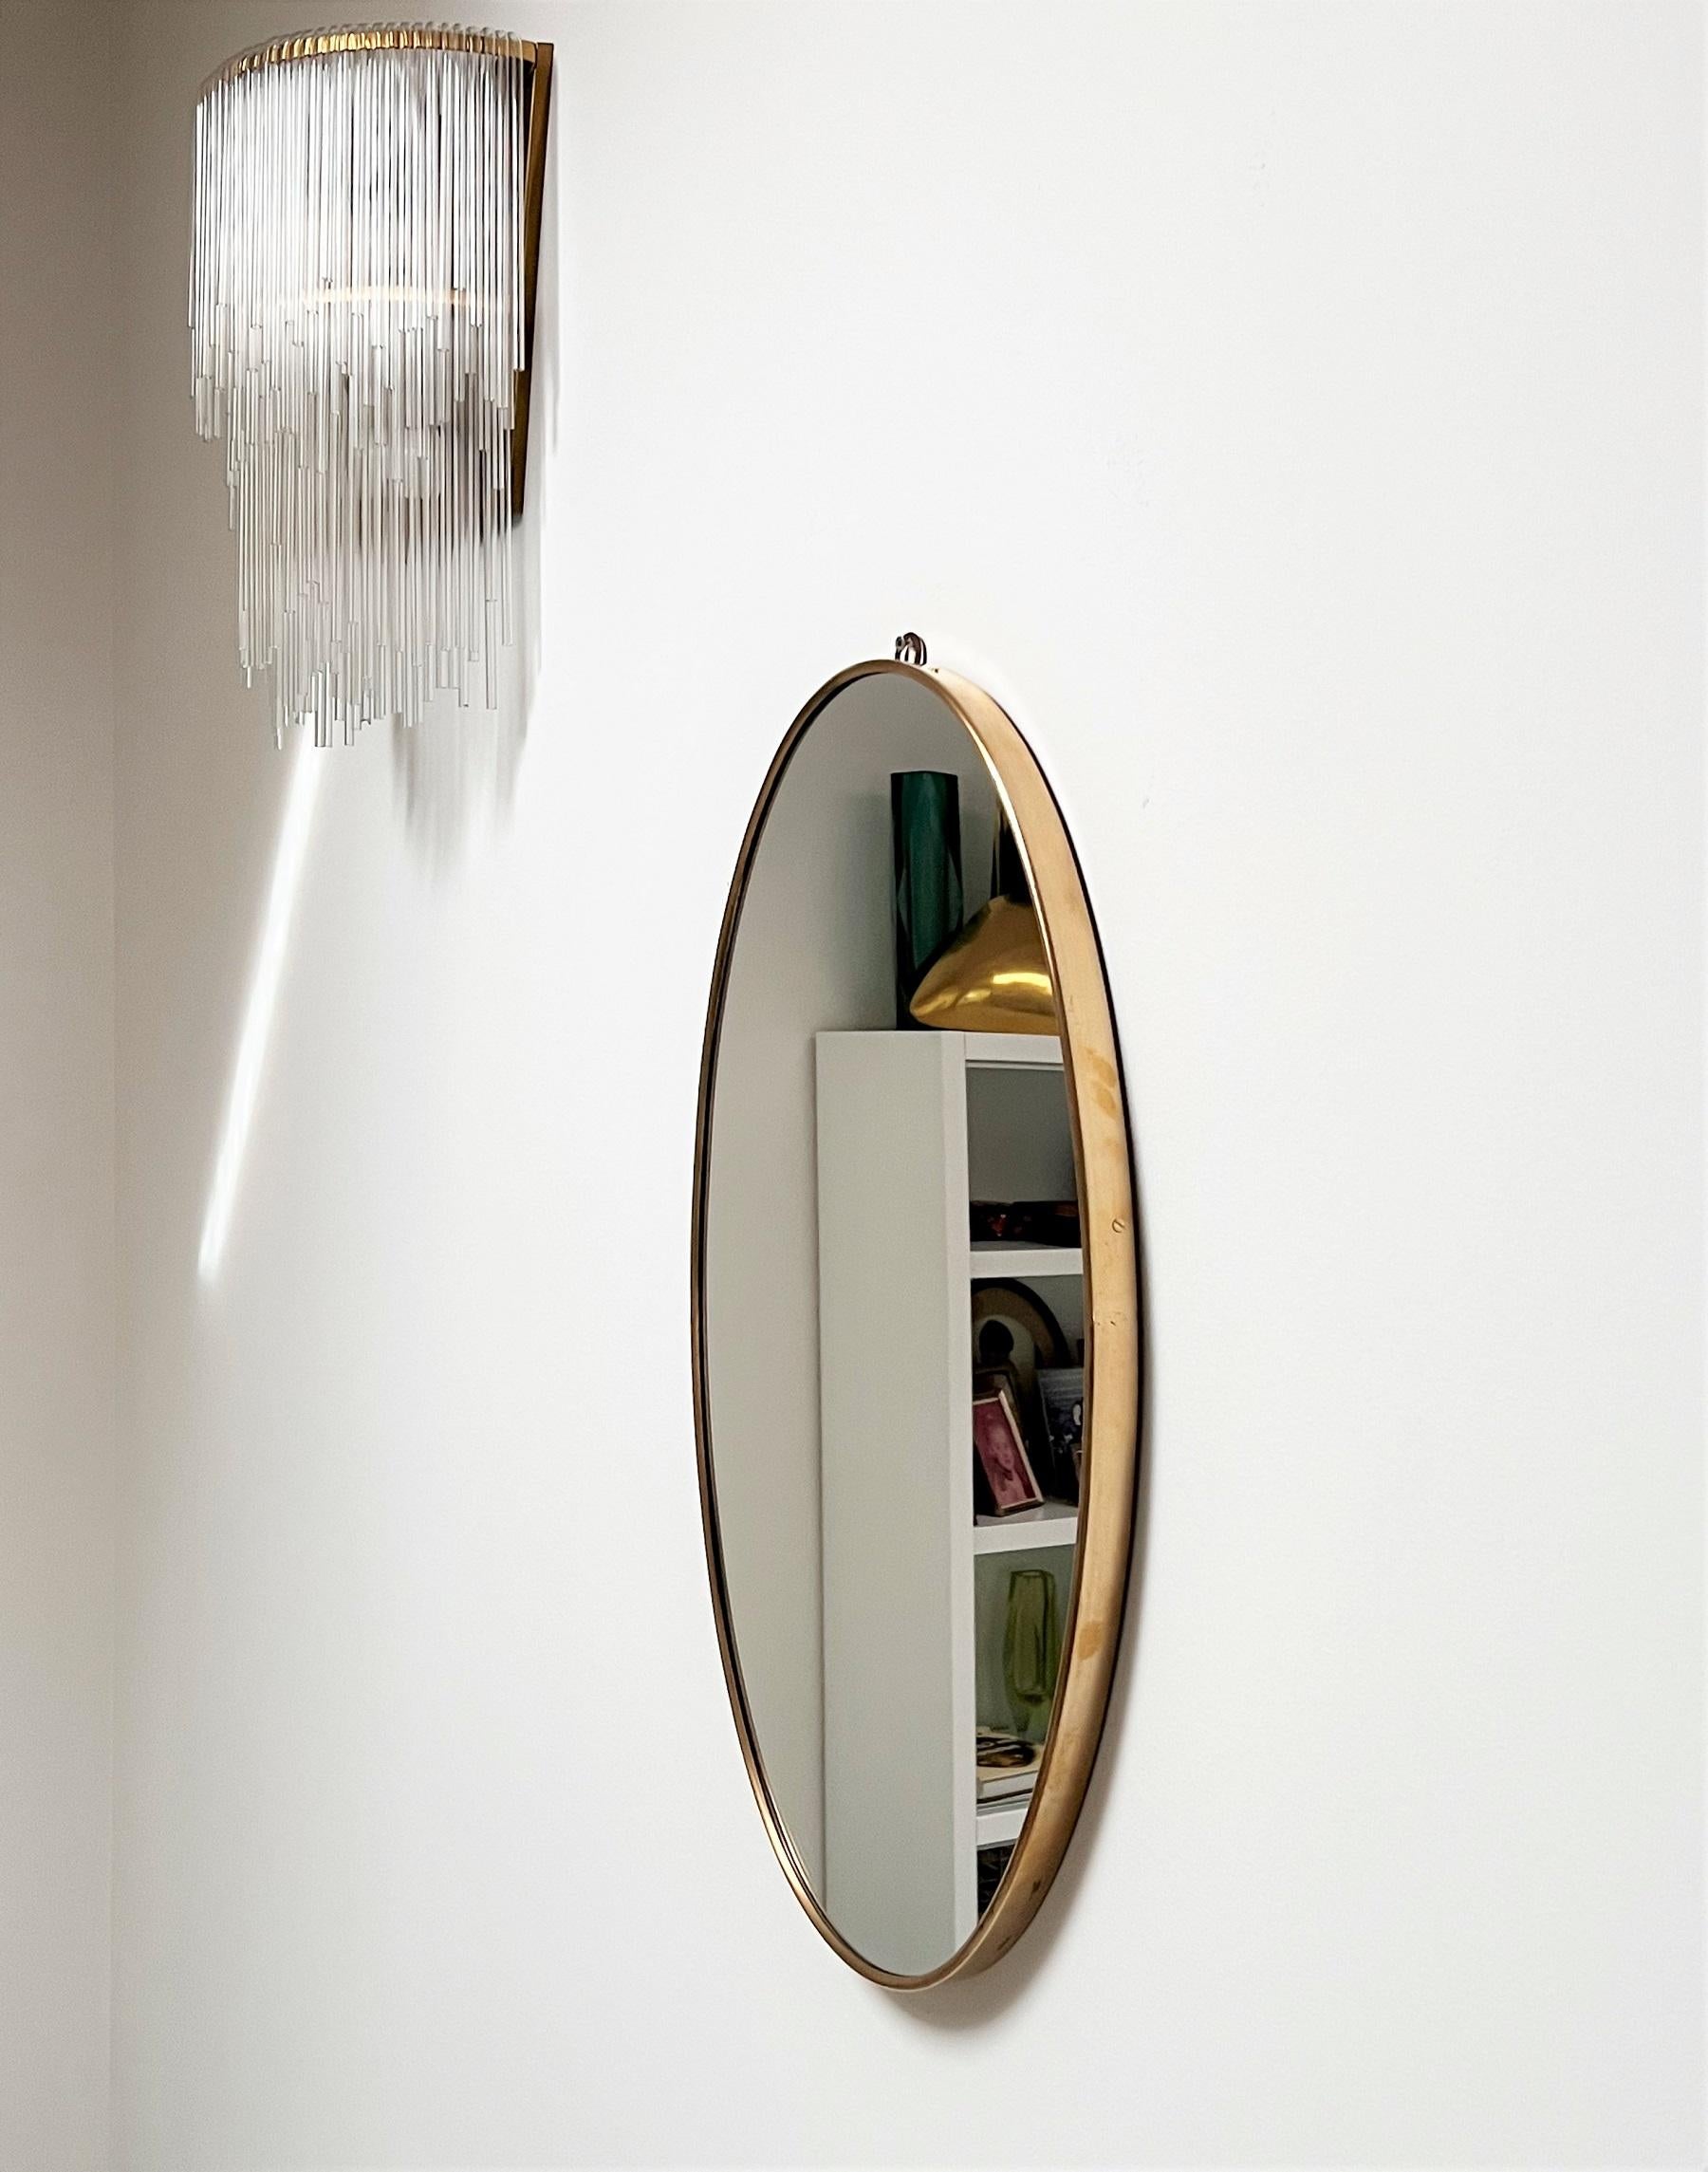 Beautiful and original oval wall mirror with brass frame from Italian production of the 1960s.
The crystal glass was renewed and is in excellent condition. 
The mirror is equipped with strong wooden back plate and hook for wall hanging.
The brass